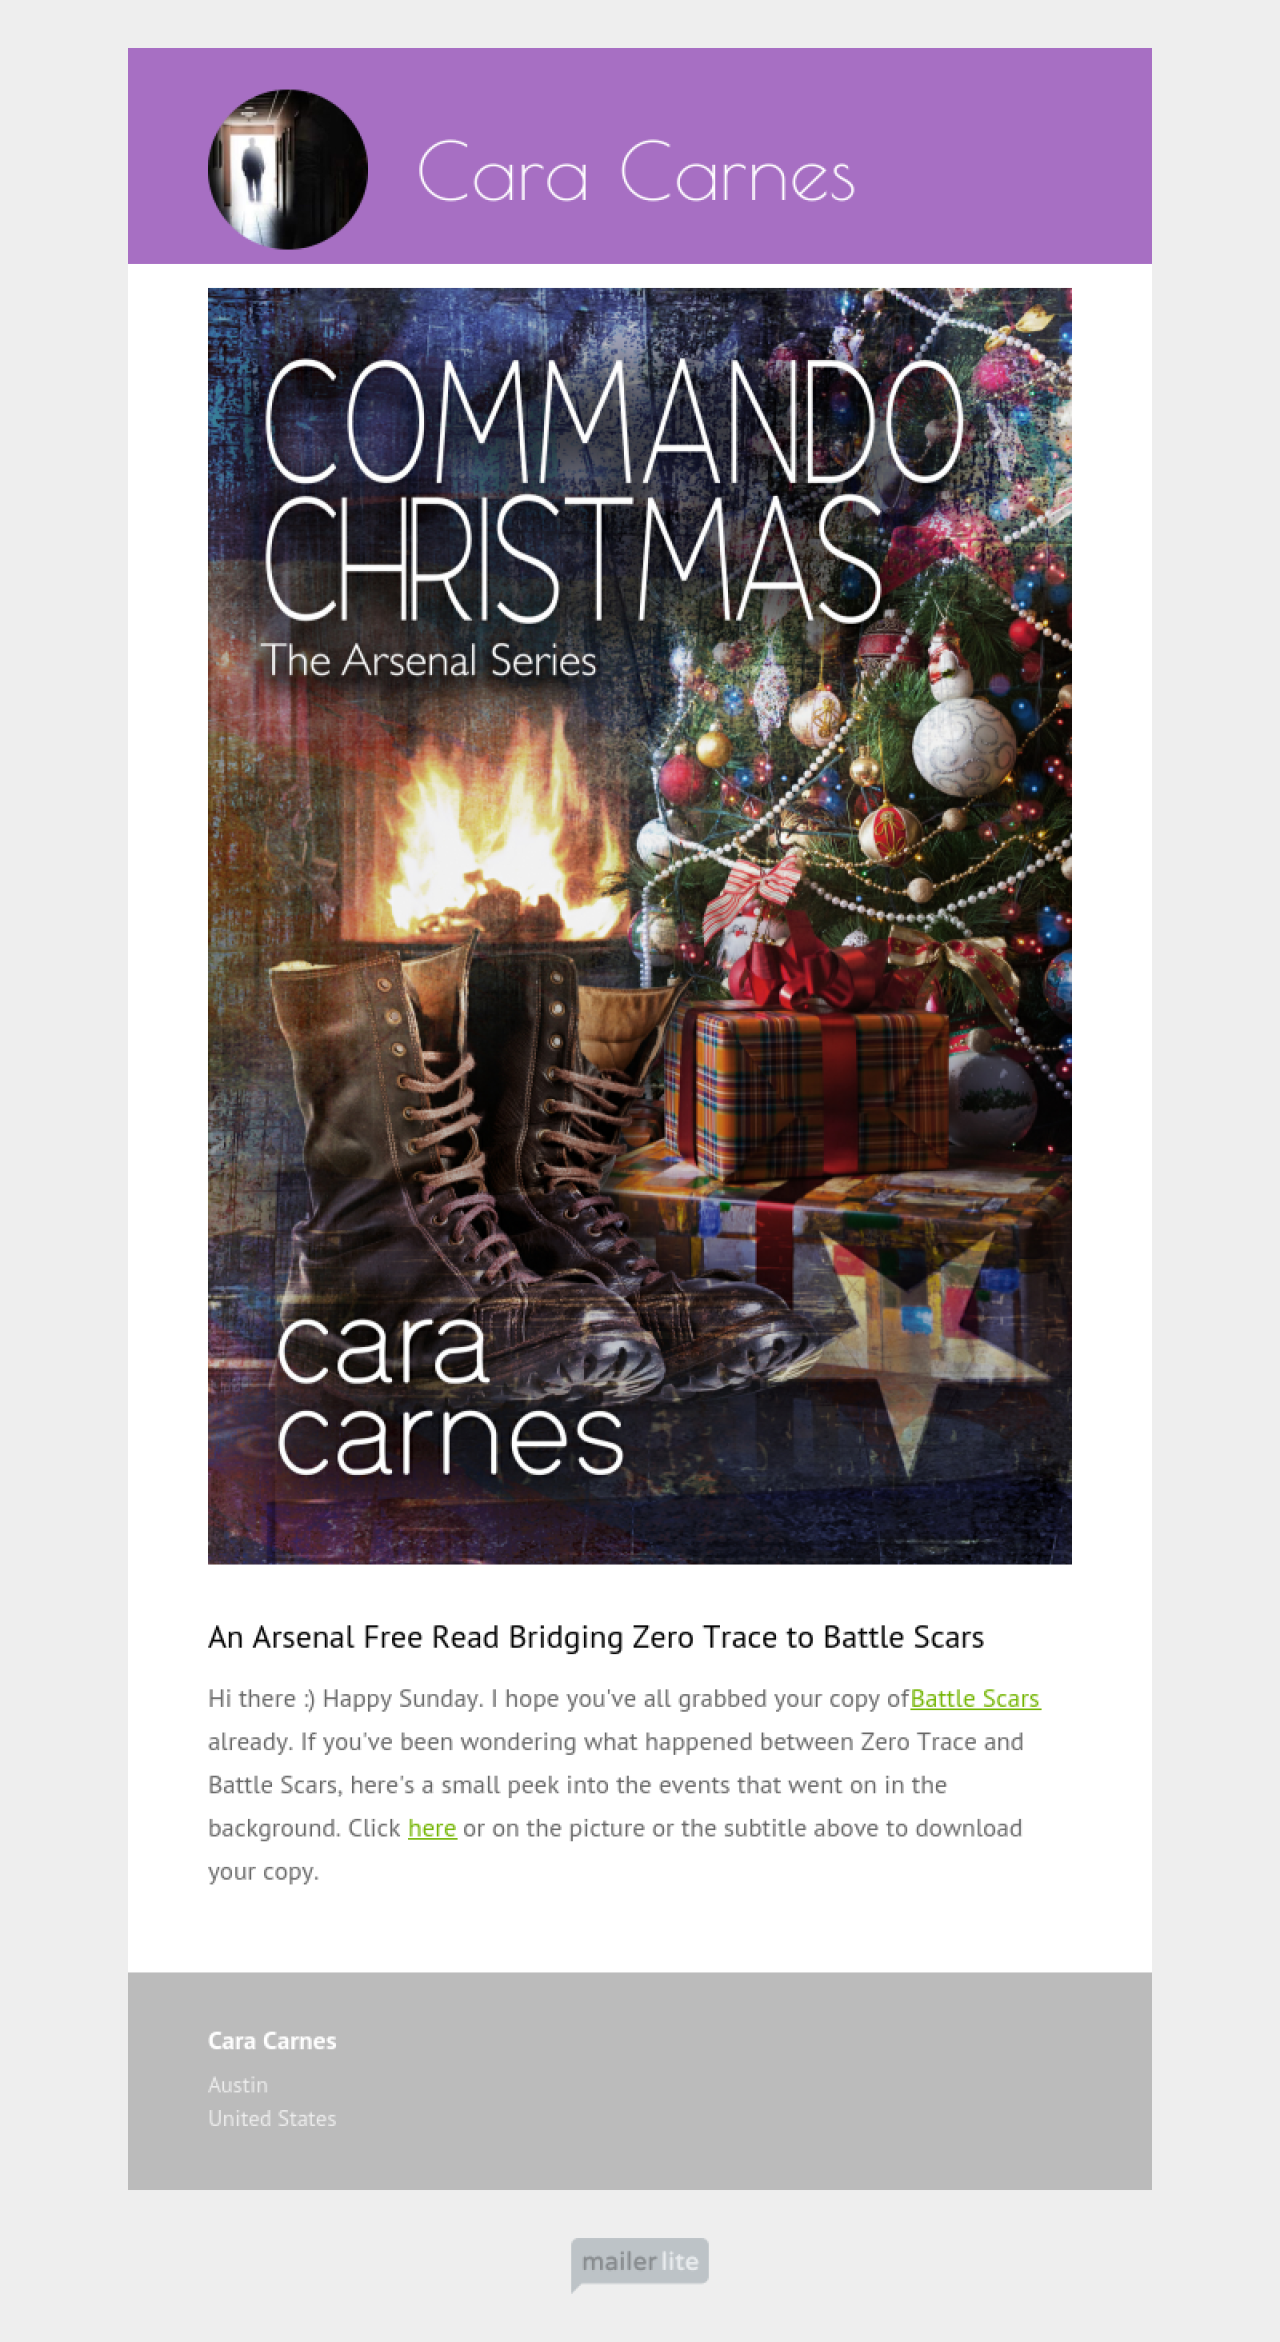 Cara Carnes - Christmas example - Made with MailerLite